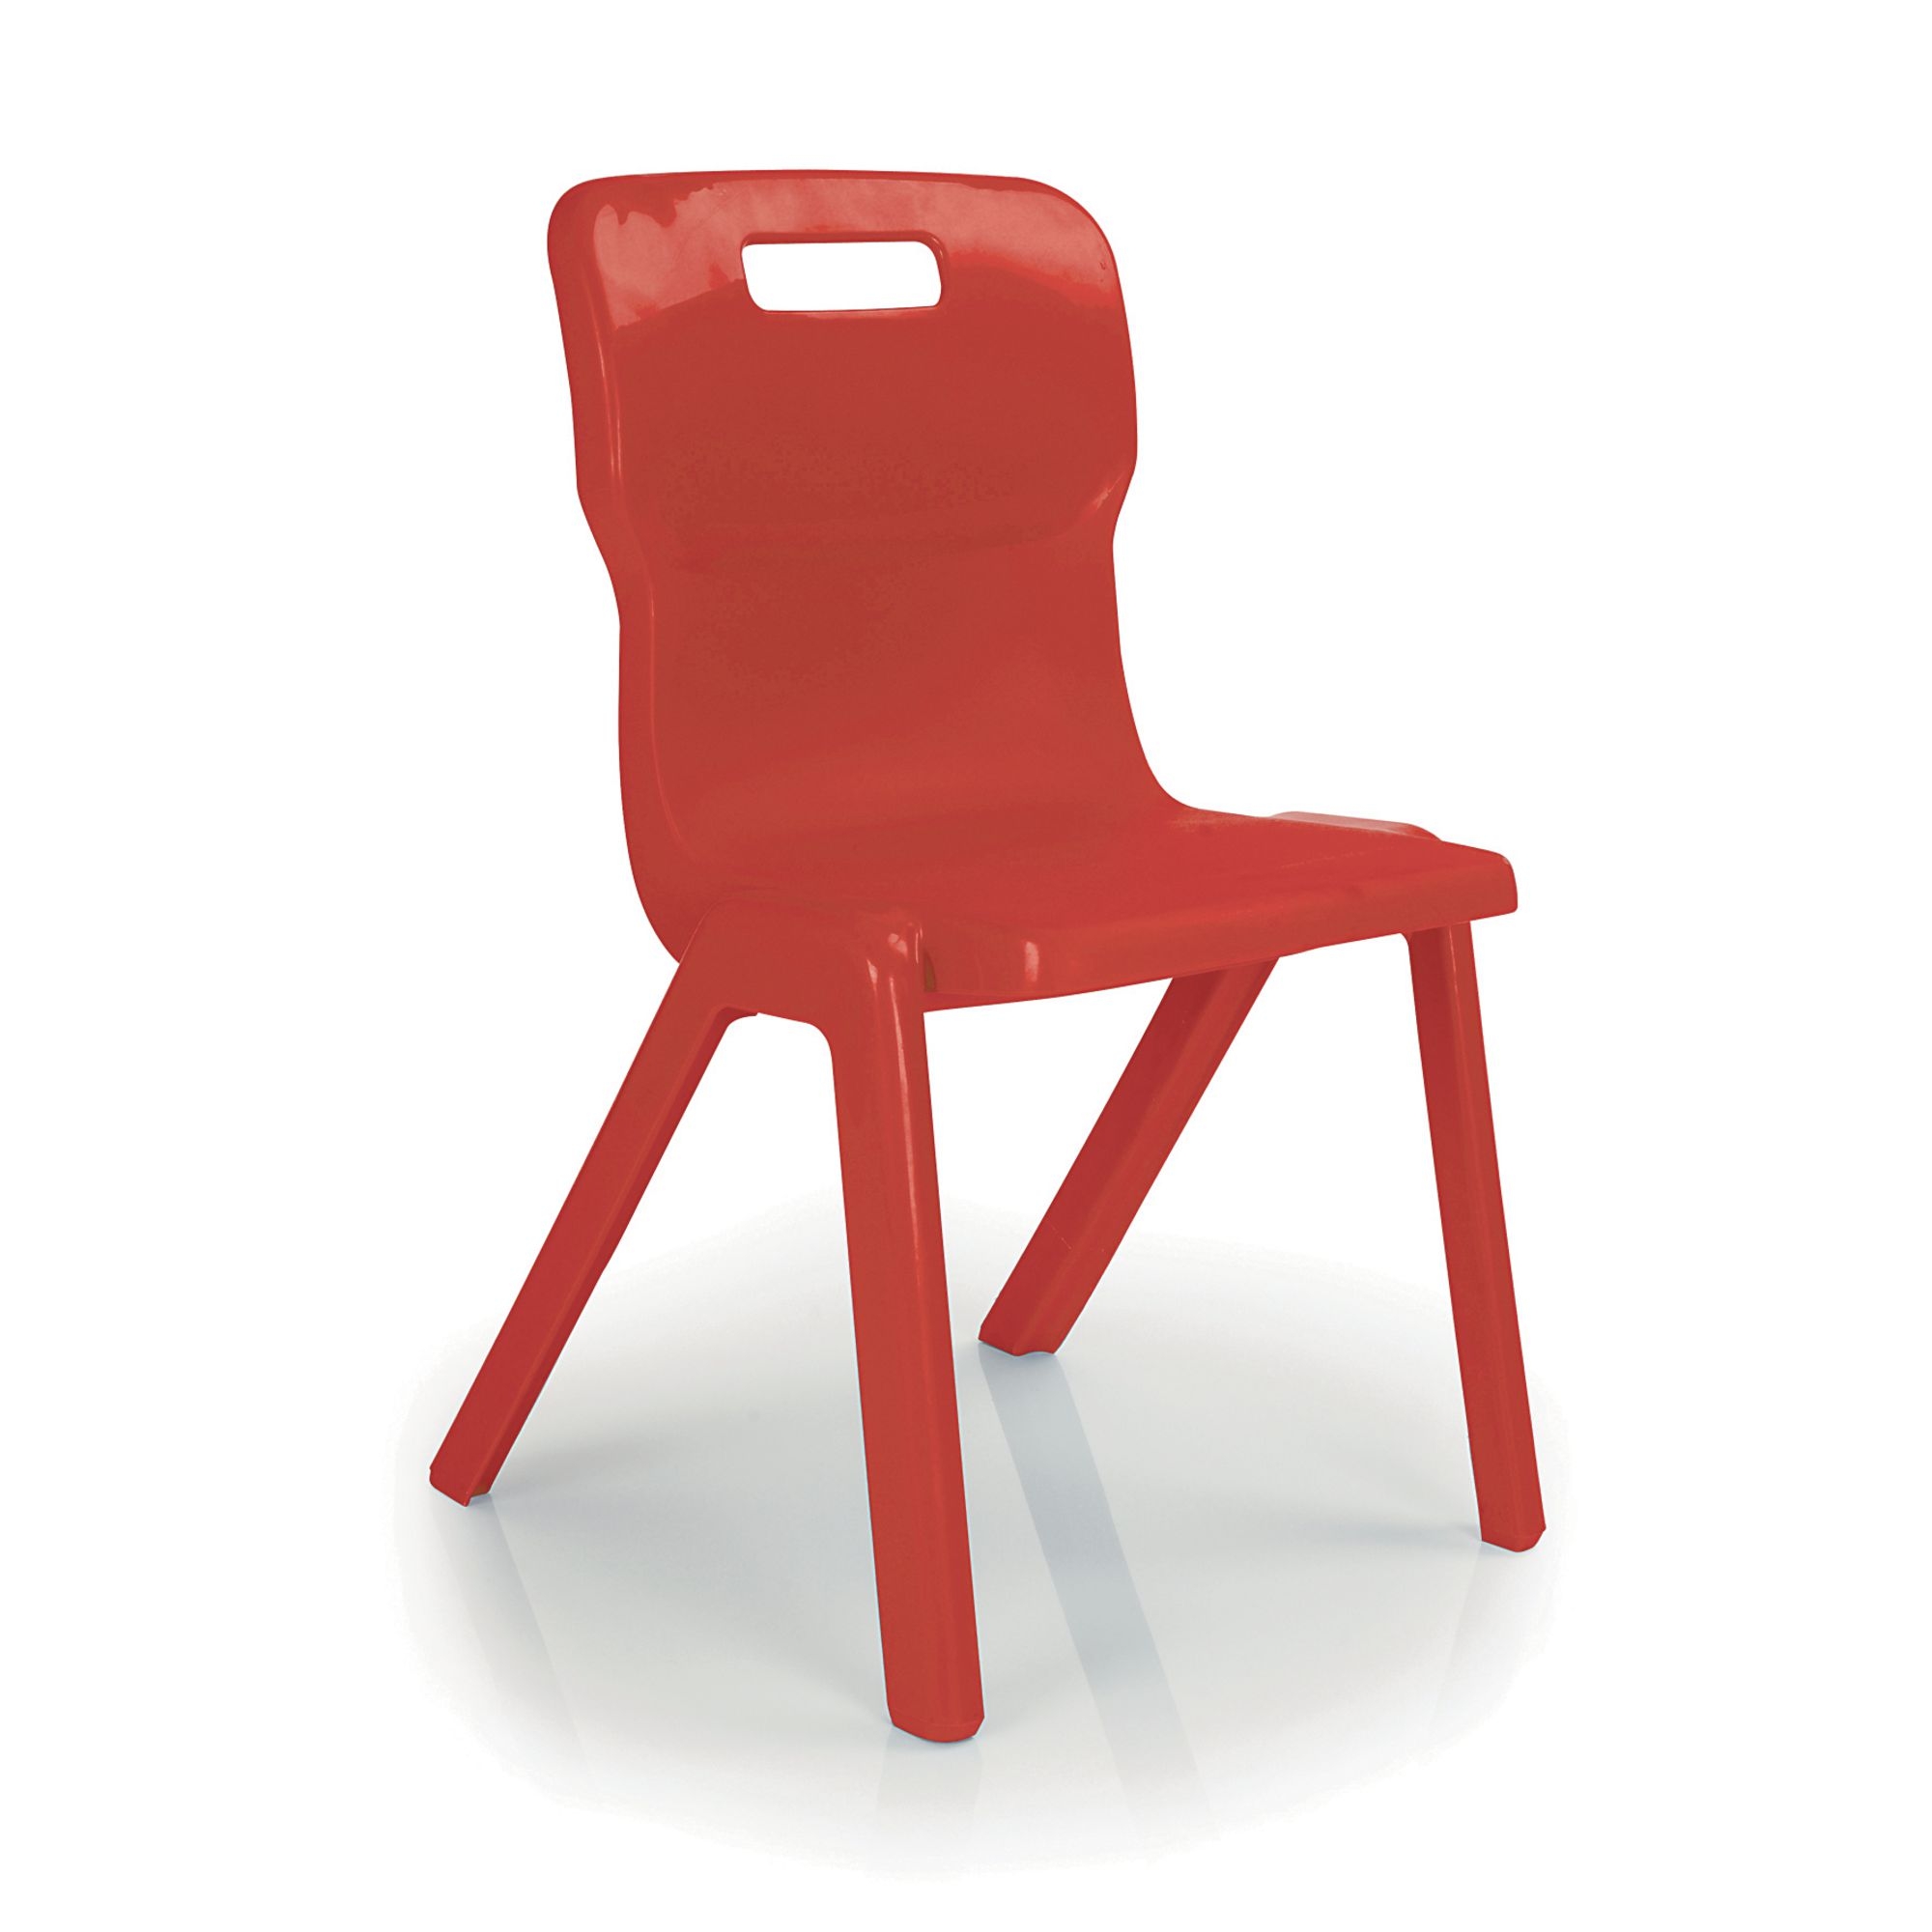 One Piece Titan Chair - Size 1 Ages 3-4 Red